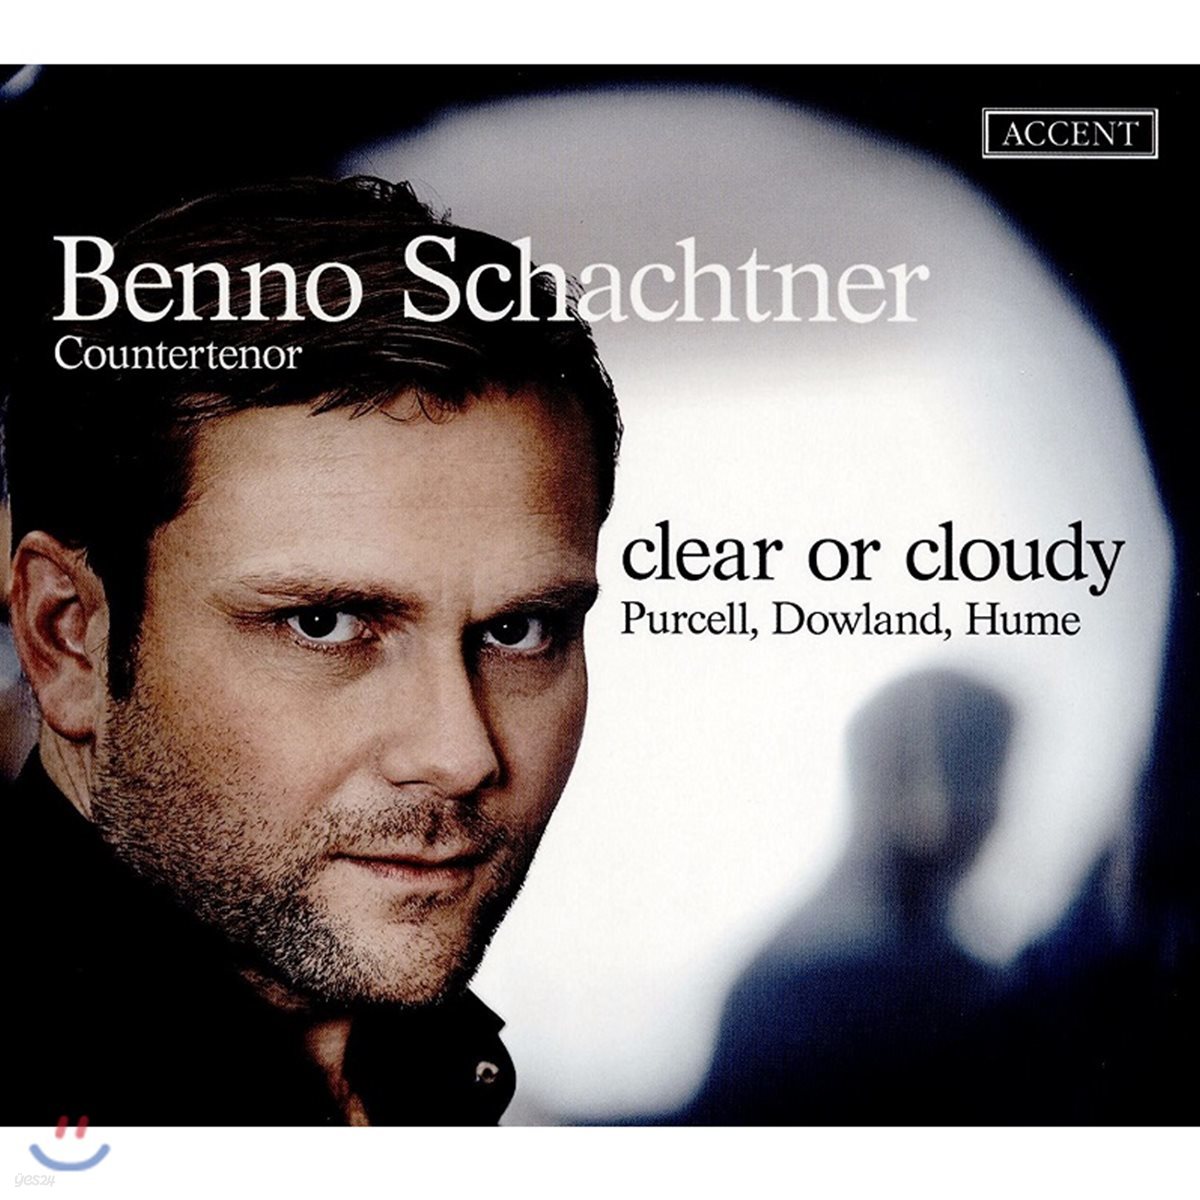 Benno Schachtner 퍼셀 / 다울랜드 / 토비아스 흄의 노래 (Clear or Cloudy - Purcell / Dowland / Tobias Hume)